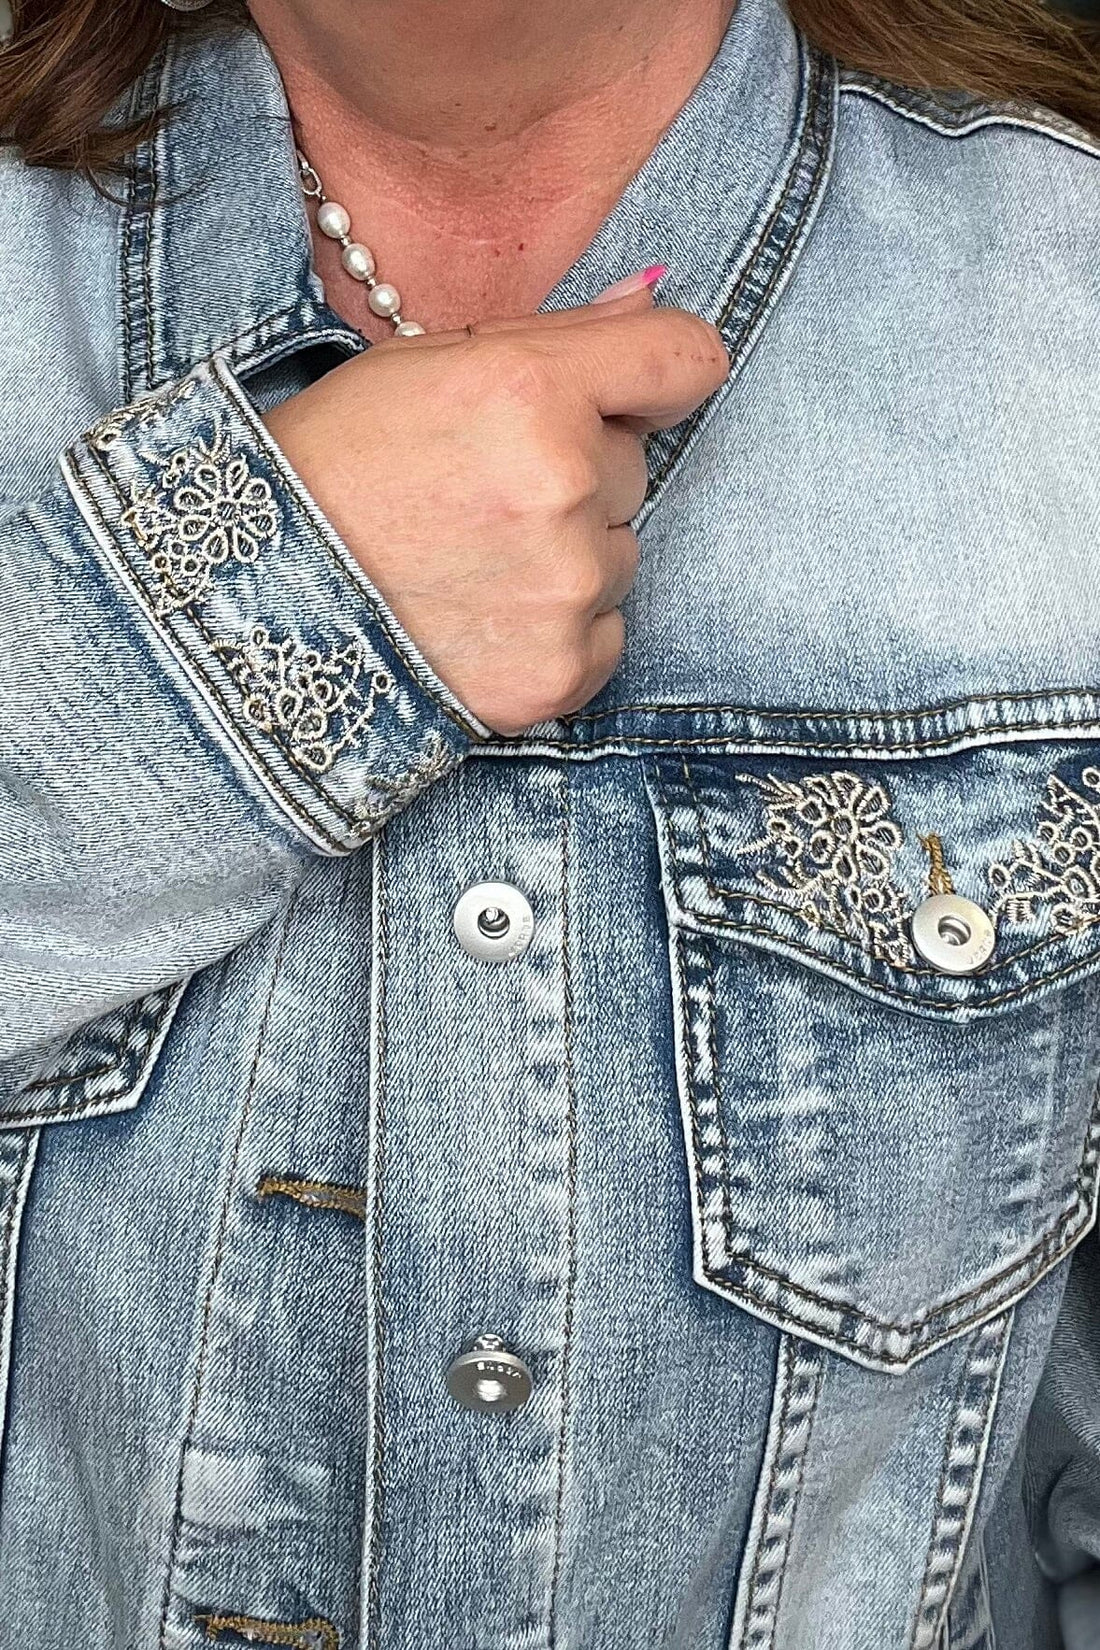 Jean Jacket with Embroidered Flowers JACKET KEREN HART 